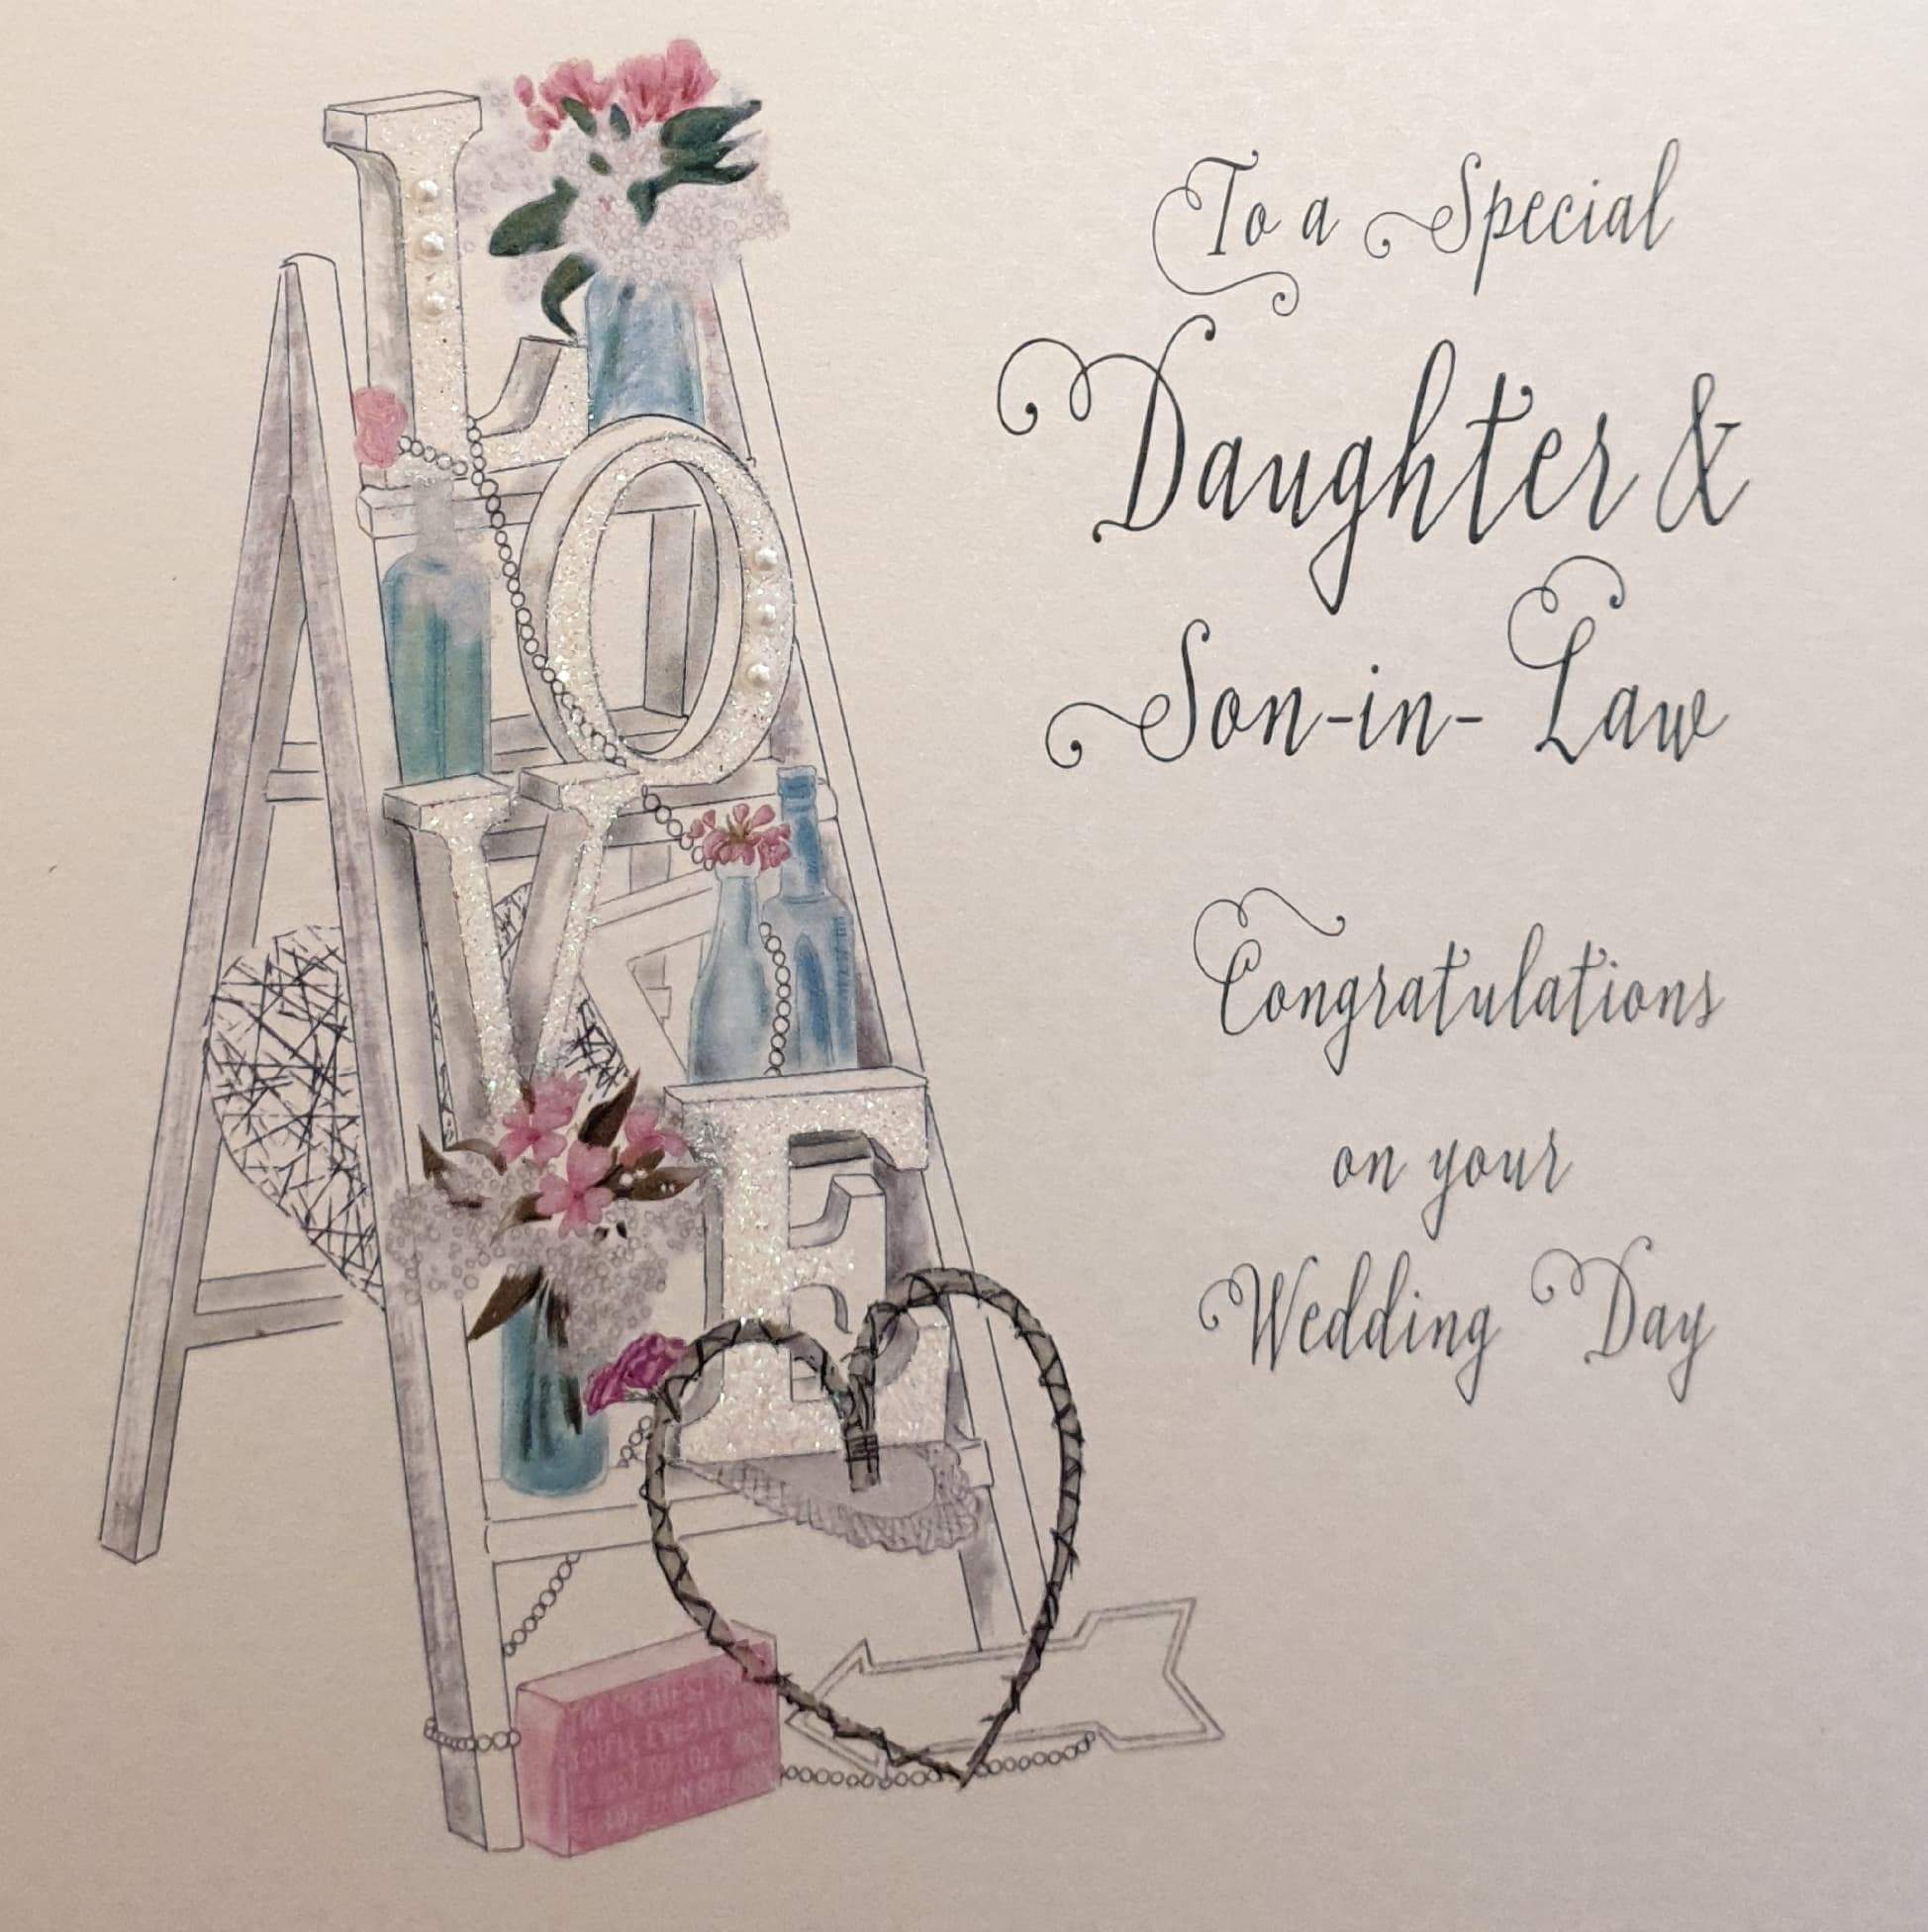 Wedding Card - Daughter & Son-in-Law / 